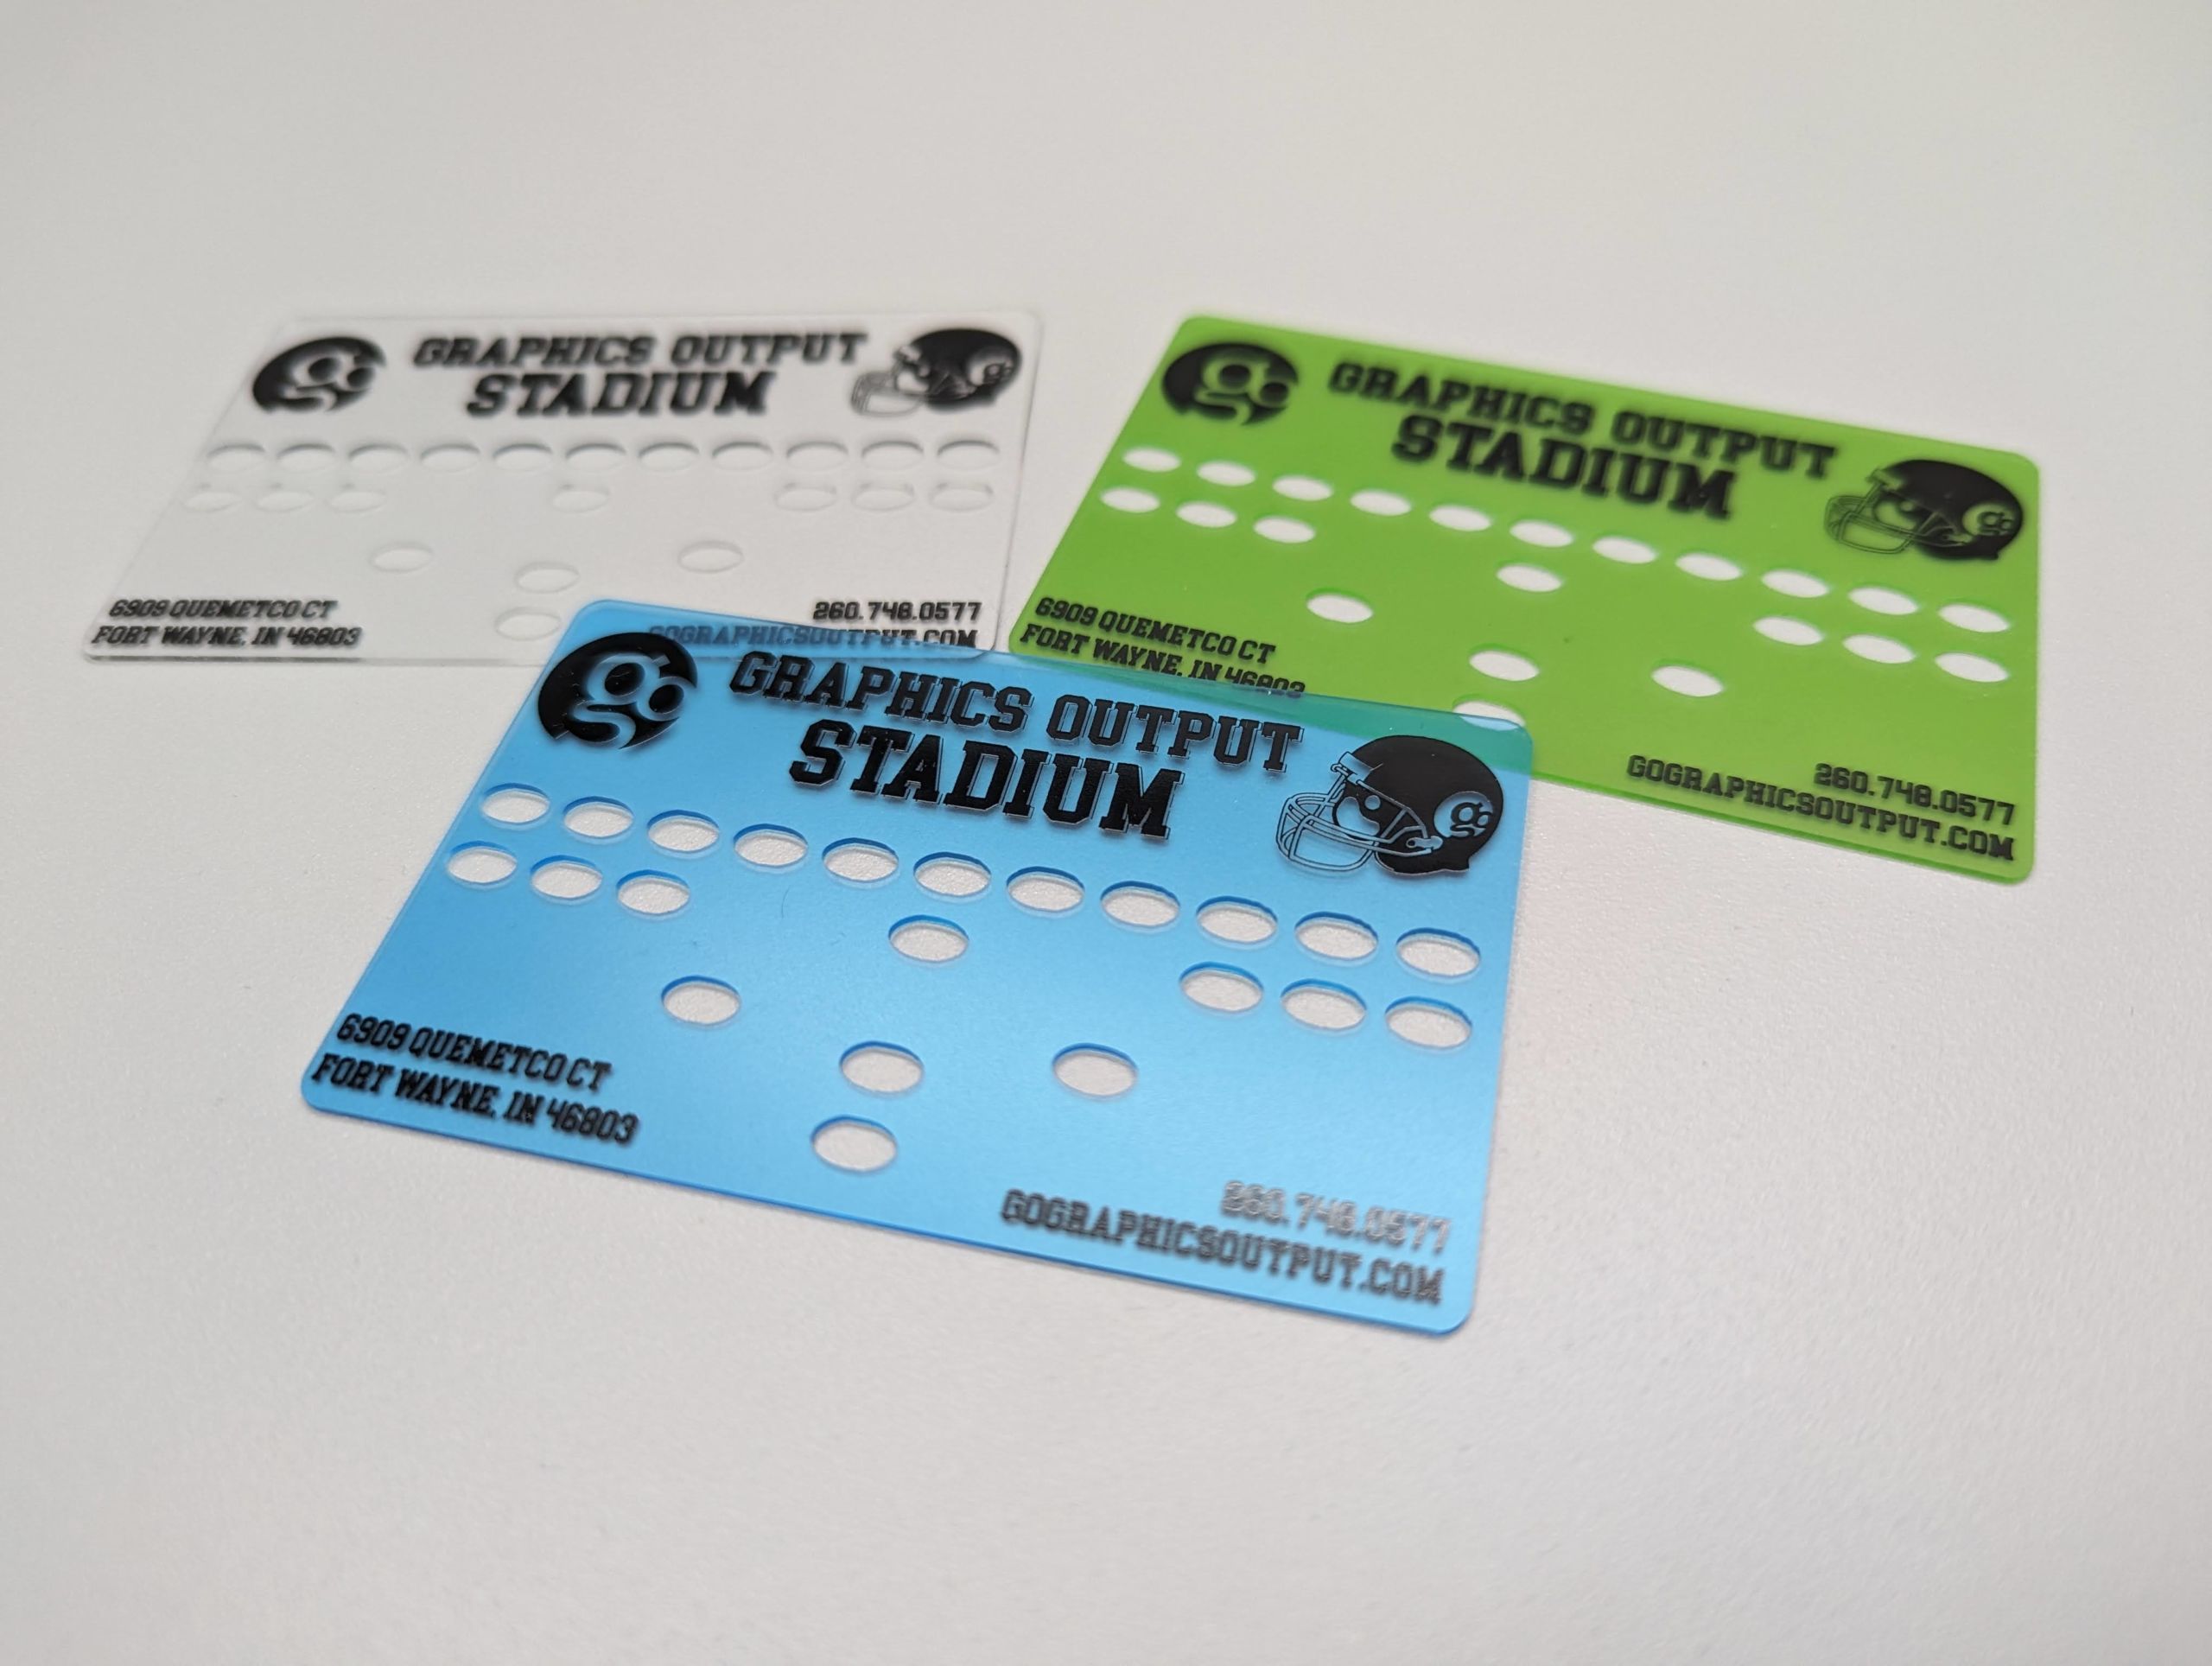 Stencil-style Business Card with cutouts for football playwriting